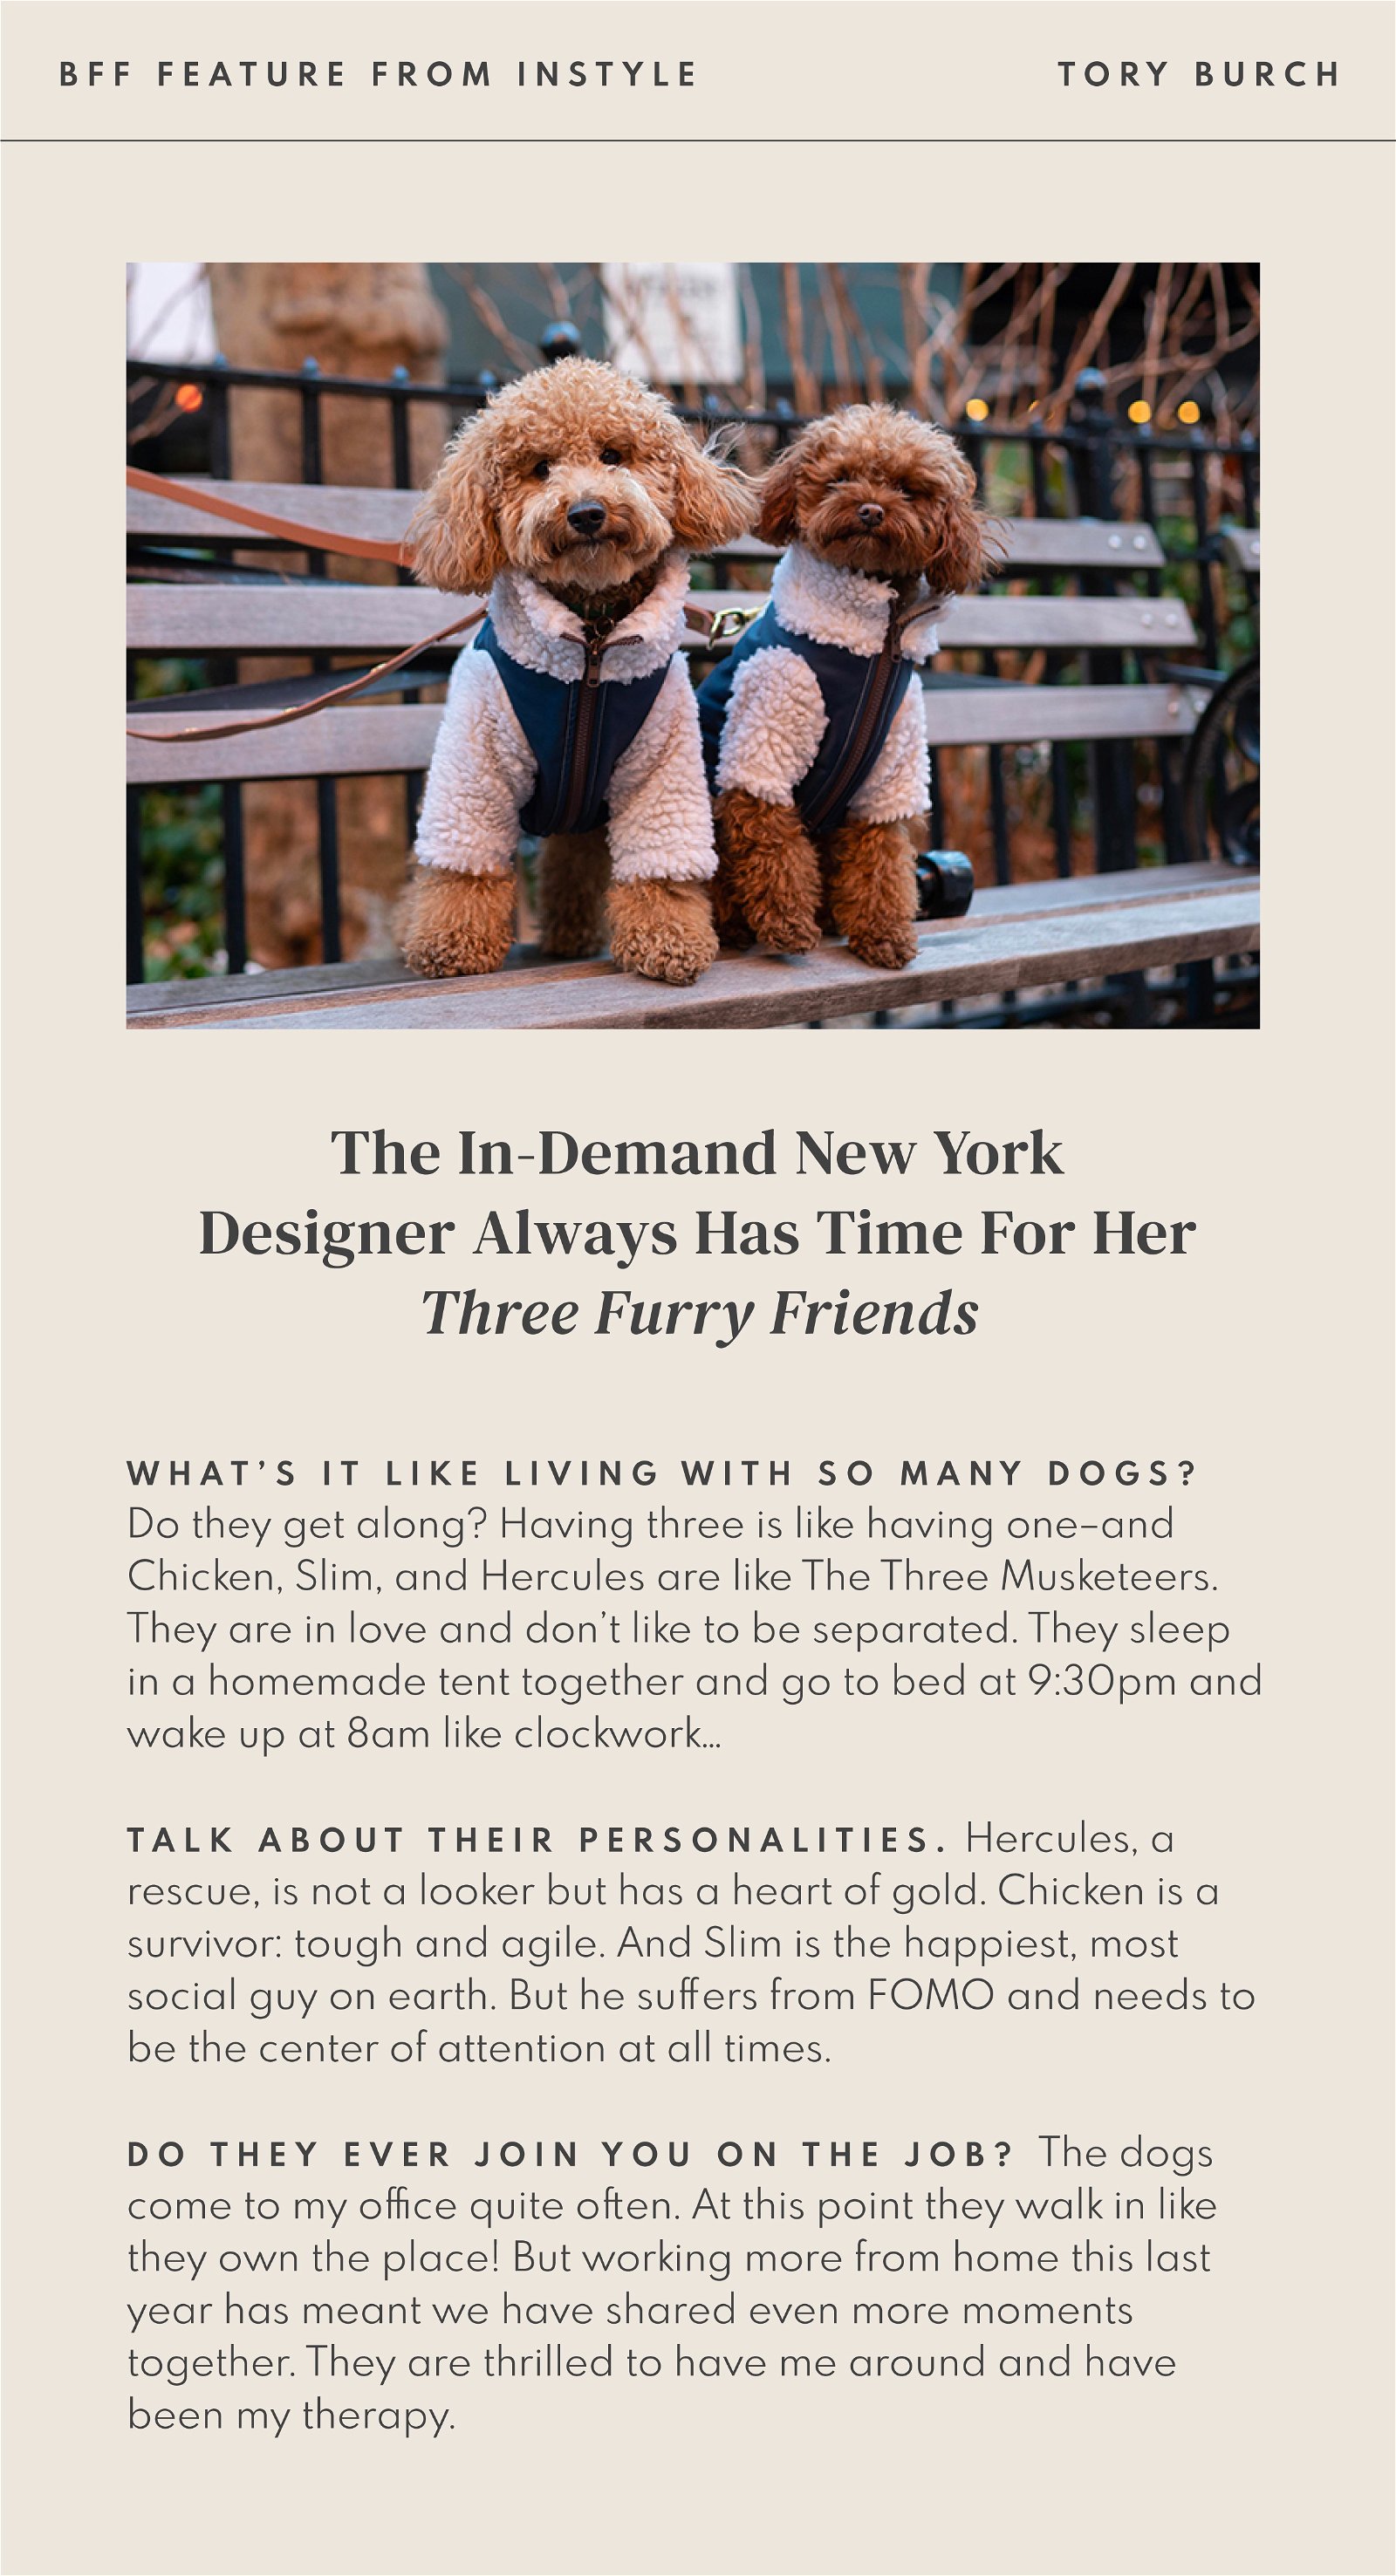 This Dog's Life: Tory Burch Can't Get Enough of Our Coats | Milled